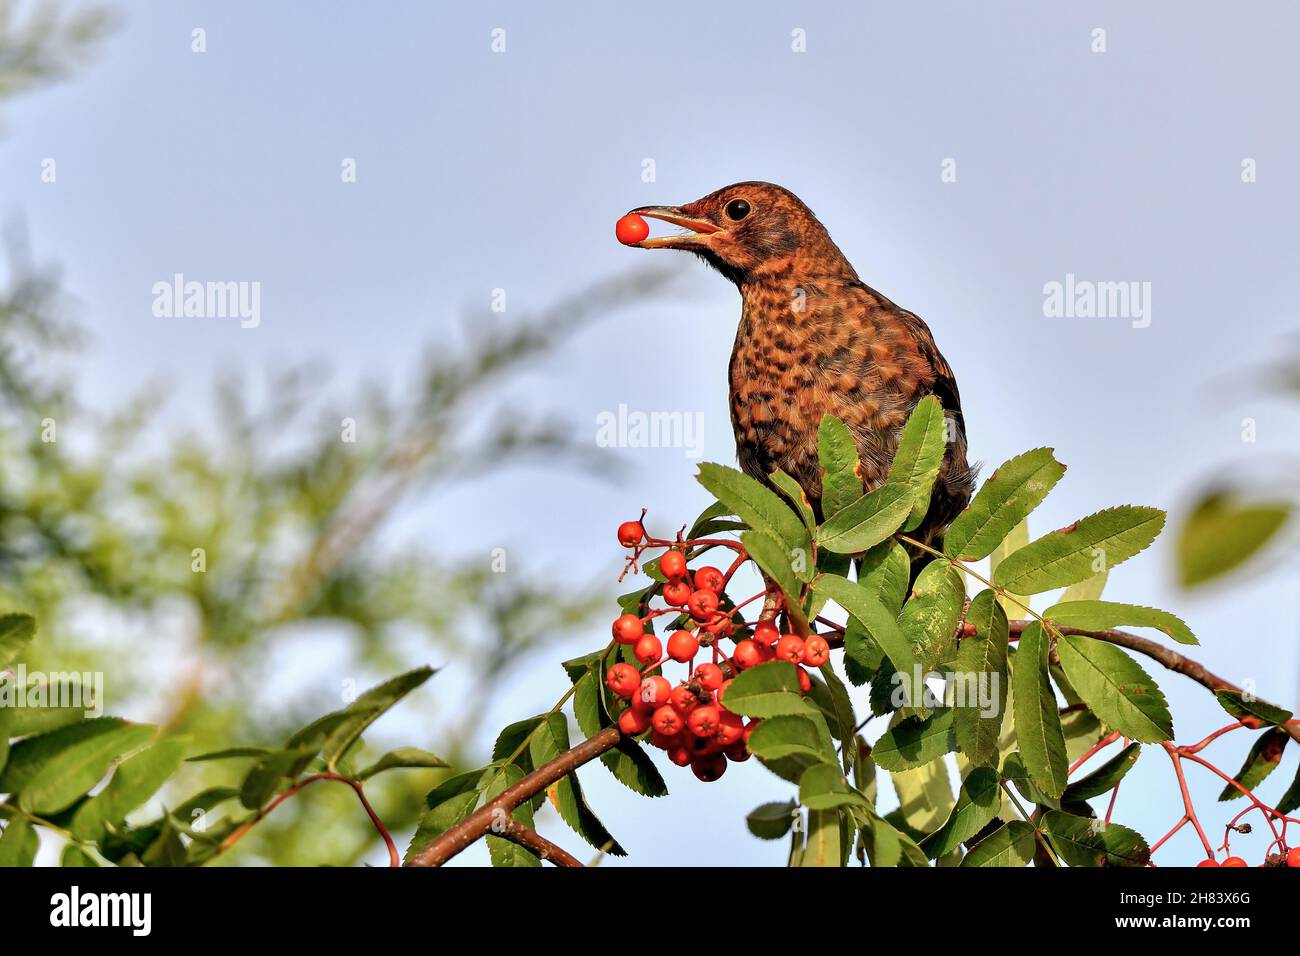 Rowanberry counting has begun for this season. Stock Photo